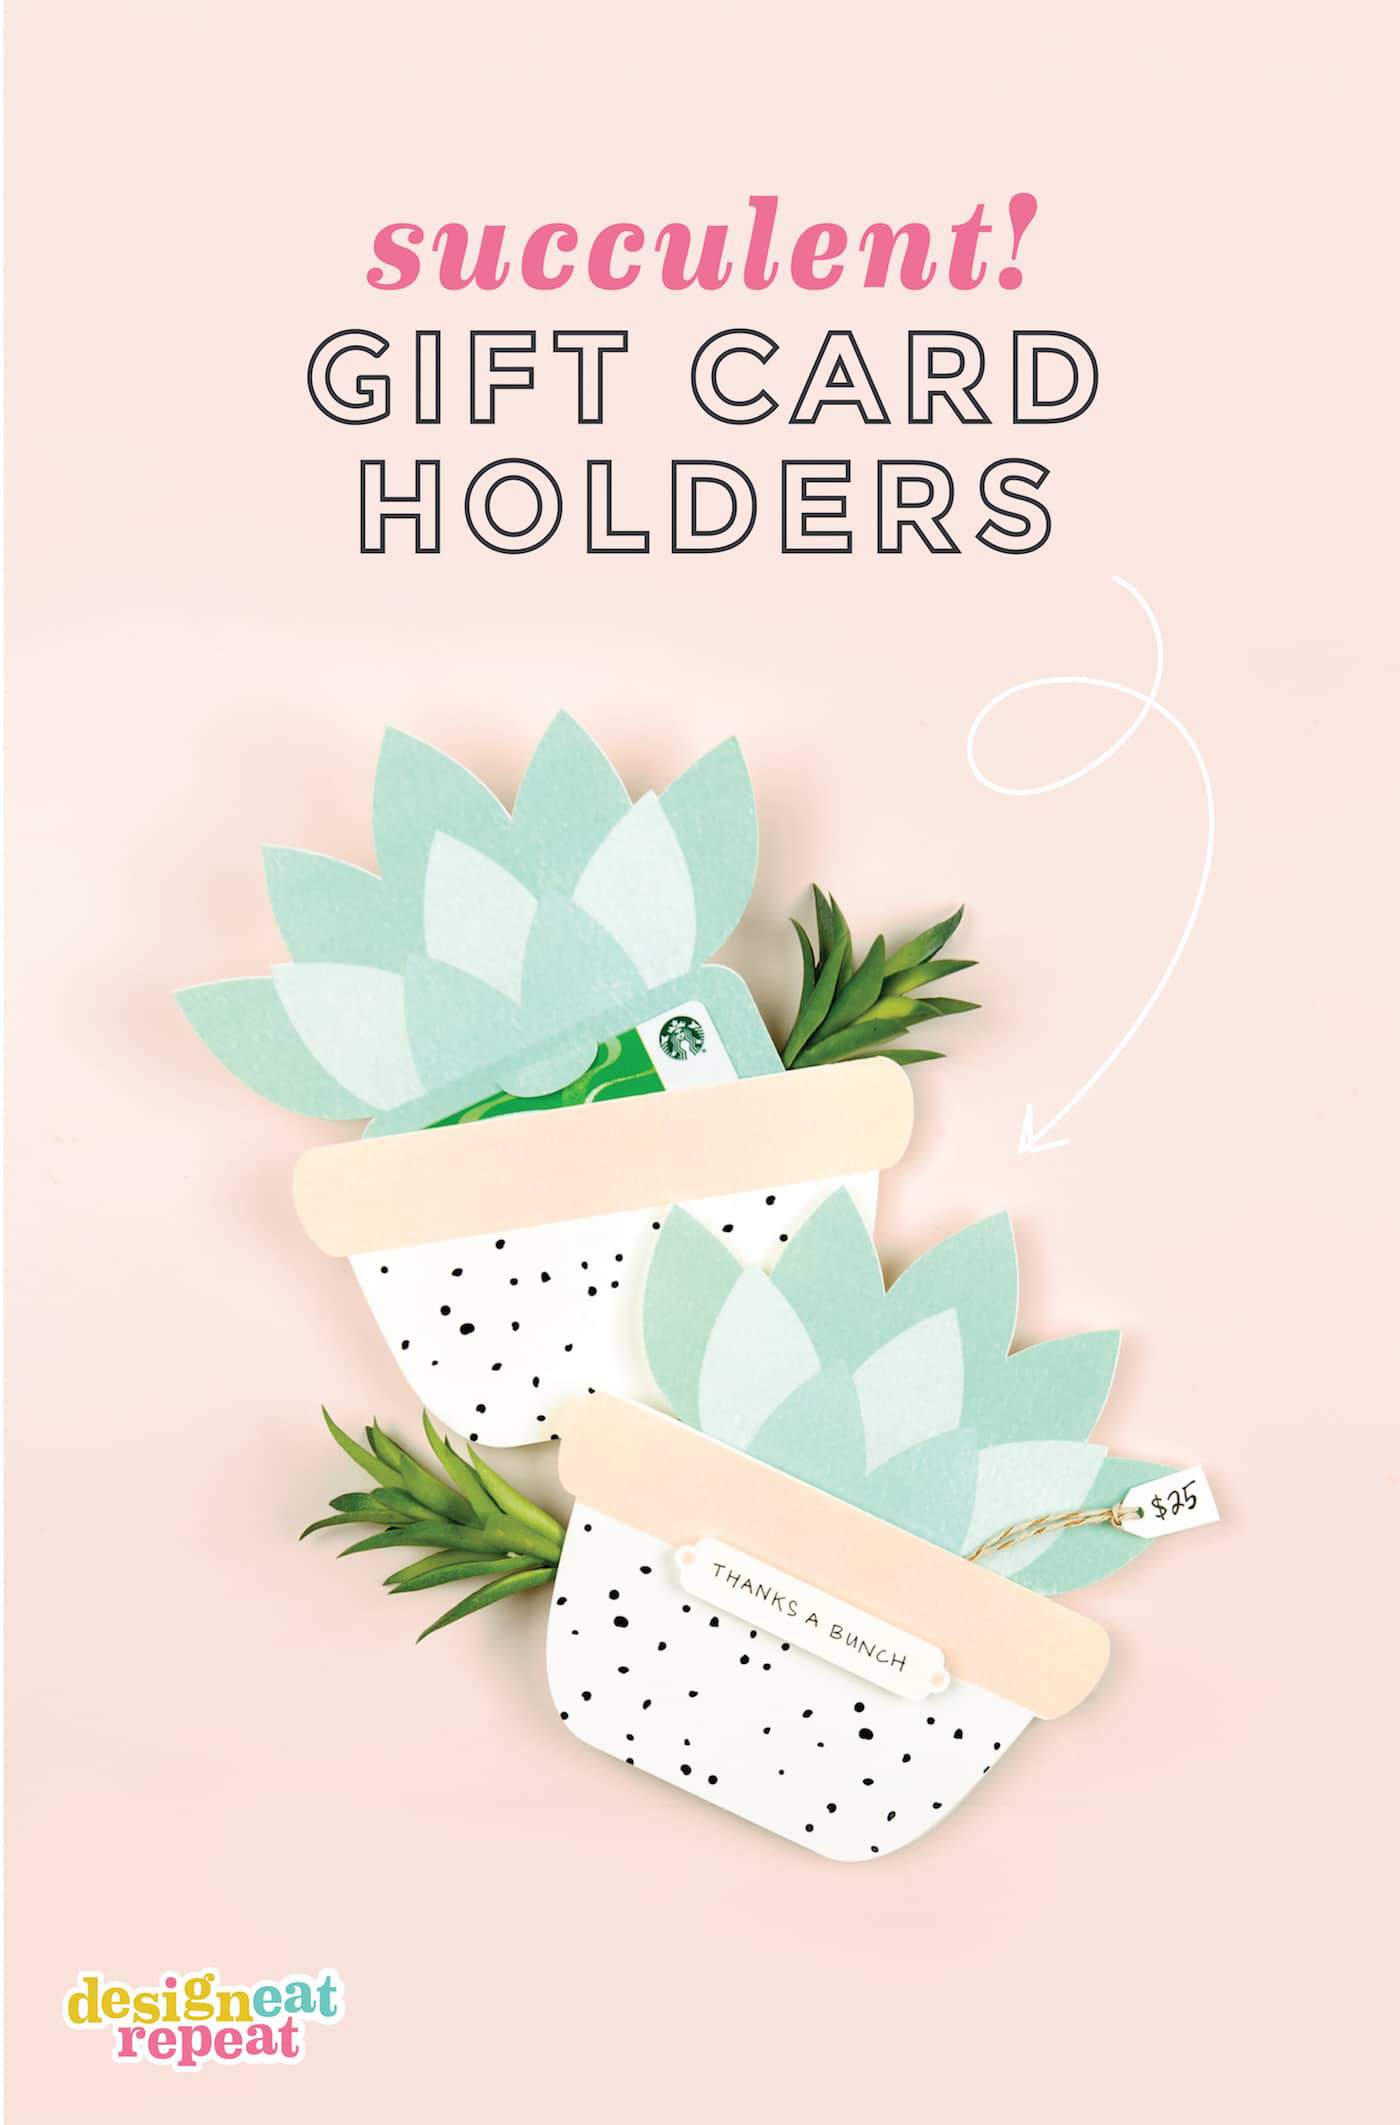 Cutest Printable Gift Card Holder ever! Use this free template to make your own SUCCULENT printable gift card holders! Perfect for teacher gifts, bridal showers, and birthdays! #printable | #giftcard | www.DesignEatRepeat.com